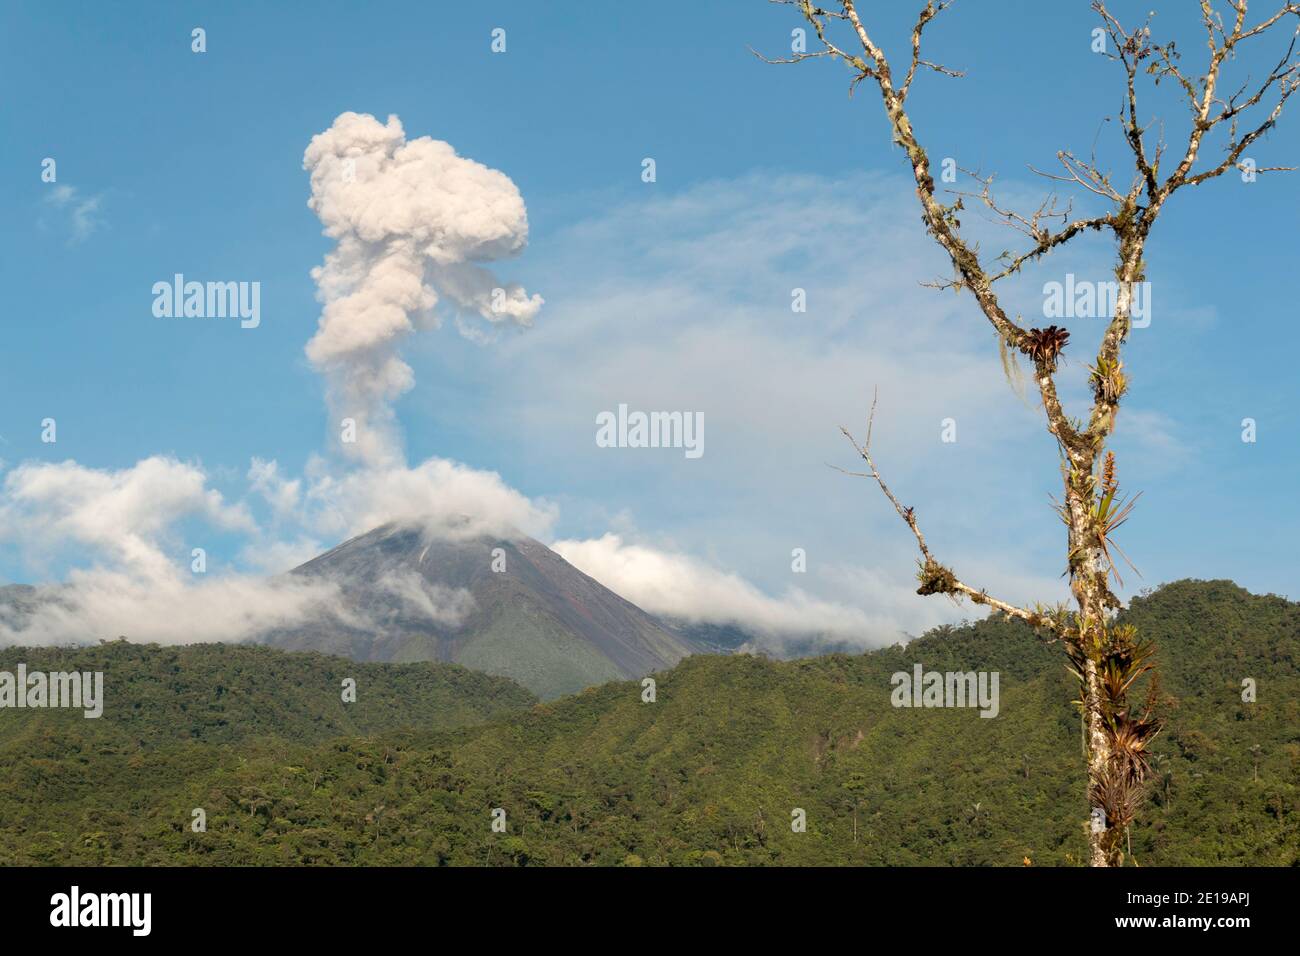 Reventador Volcano erupting, November 2015. The mountain is situated in a remote part of the Ecuadorian Amazon surrounded by rainforest. Stock Photo